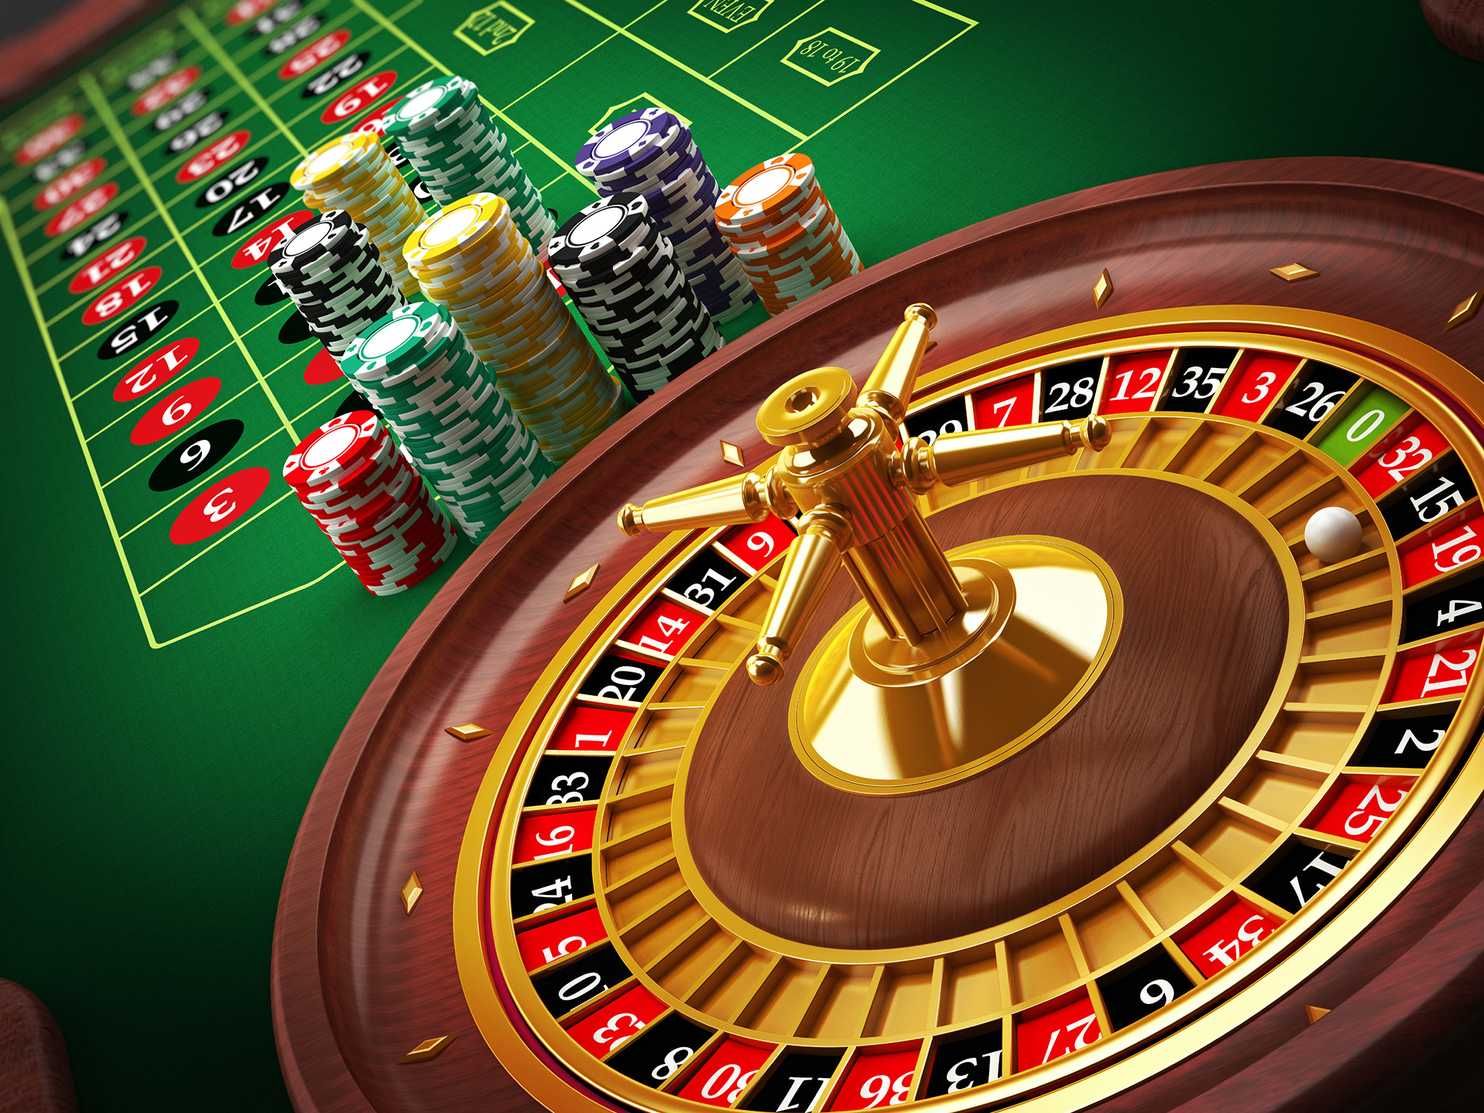 The best strategies to use in an online casino - Freedom of Research